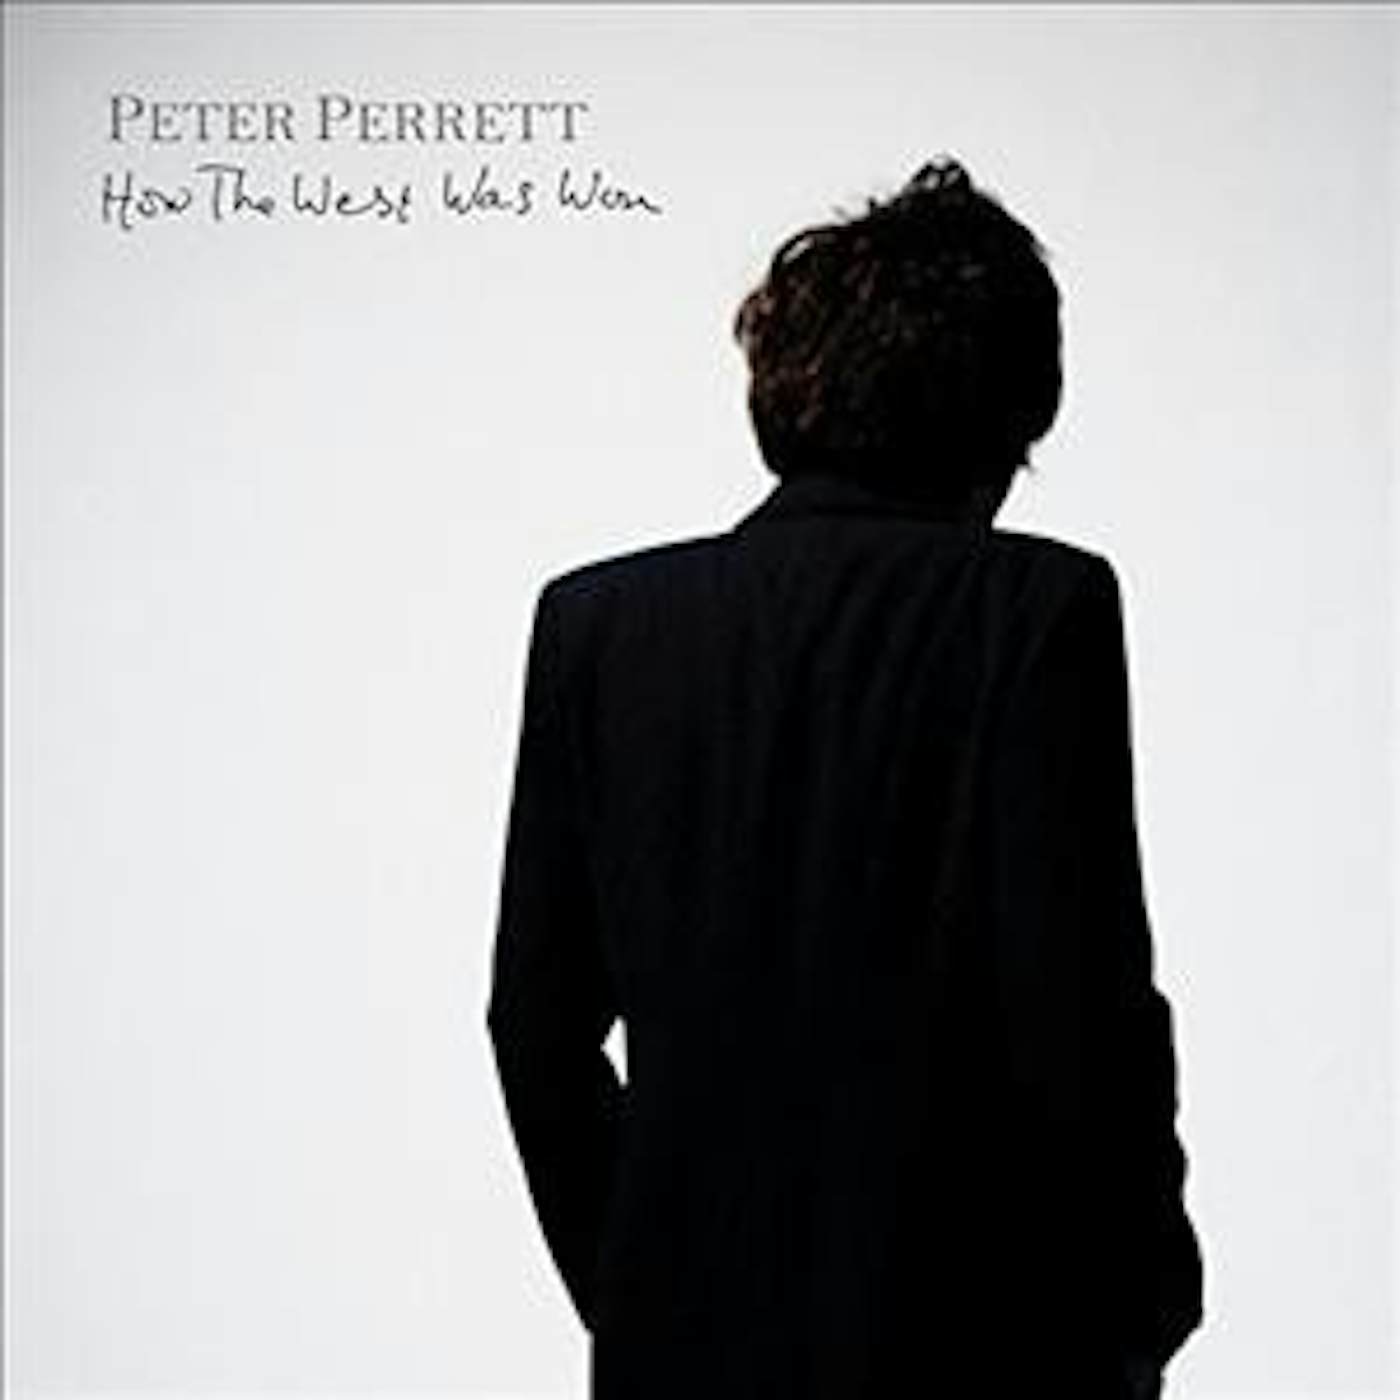 Peter Perrett How The West Was Won Vinyl Record